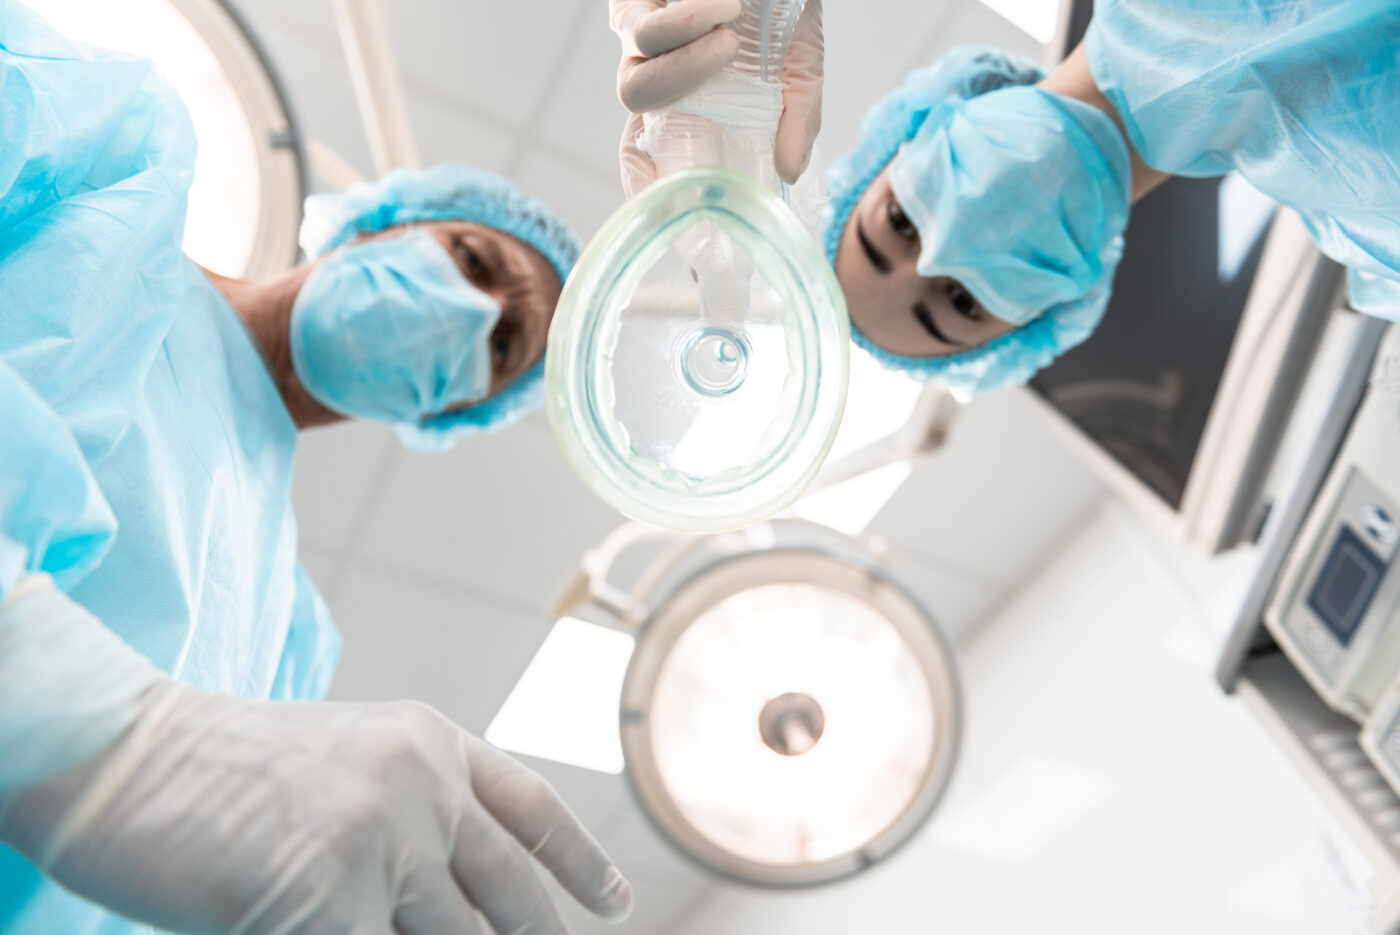 Anesthesiologist vs CRNA: What are the Key Differences?